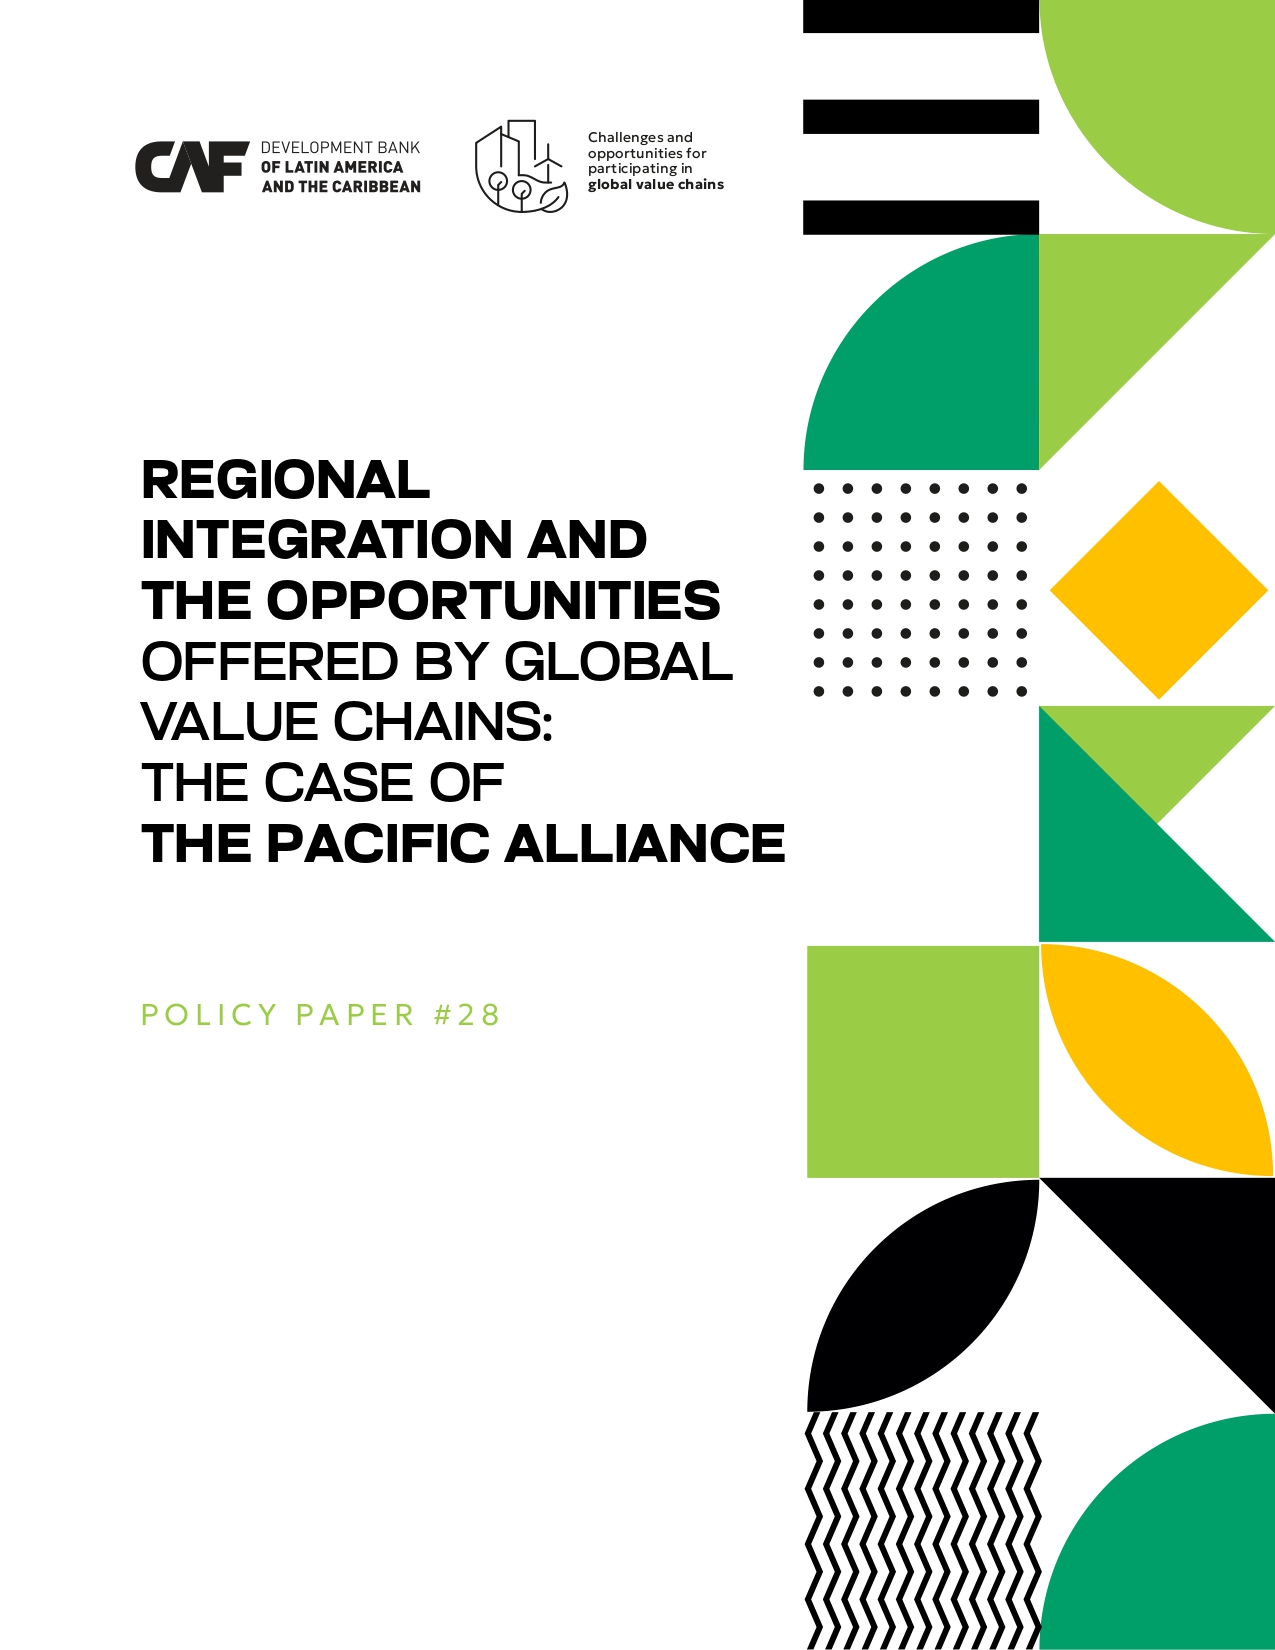 Regional Integration and the Opportunities Offered by Global Value Chains: the Case of the Pacific Alliance